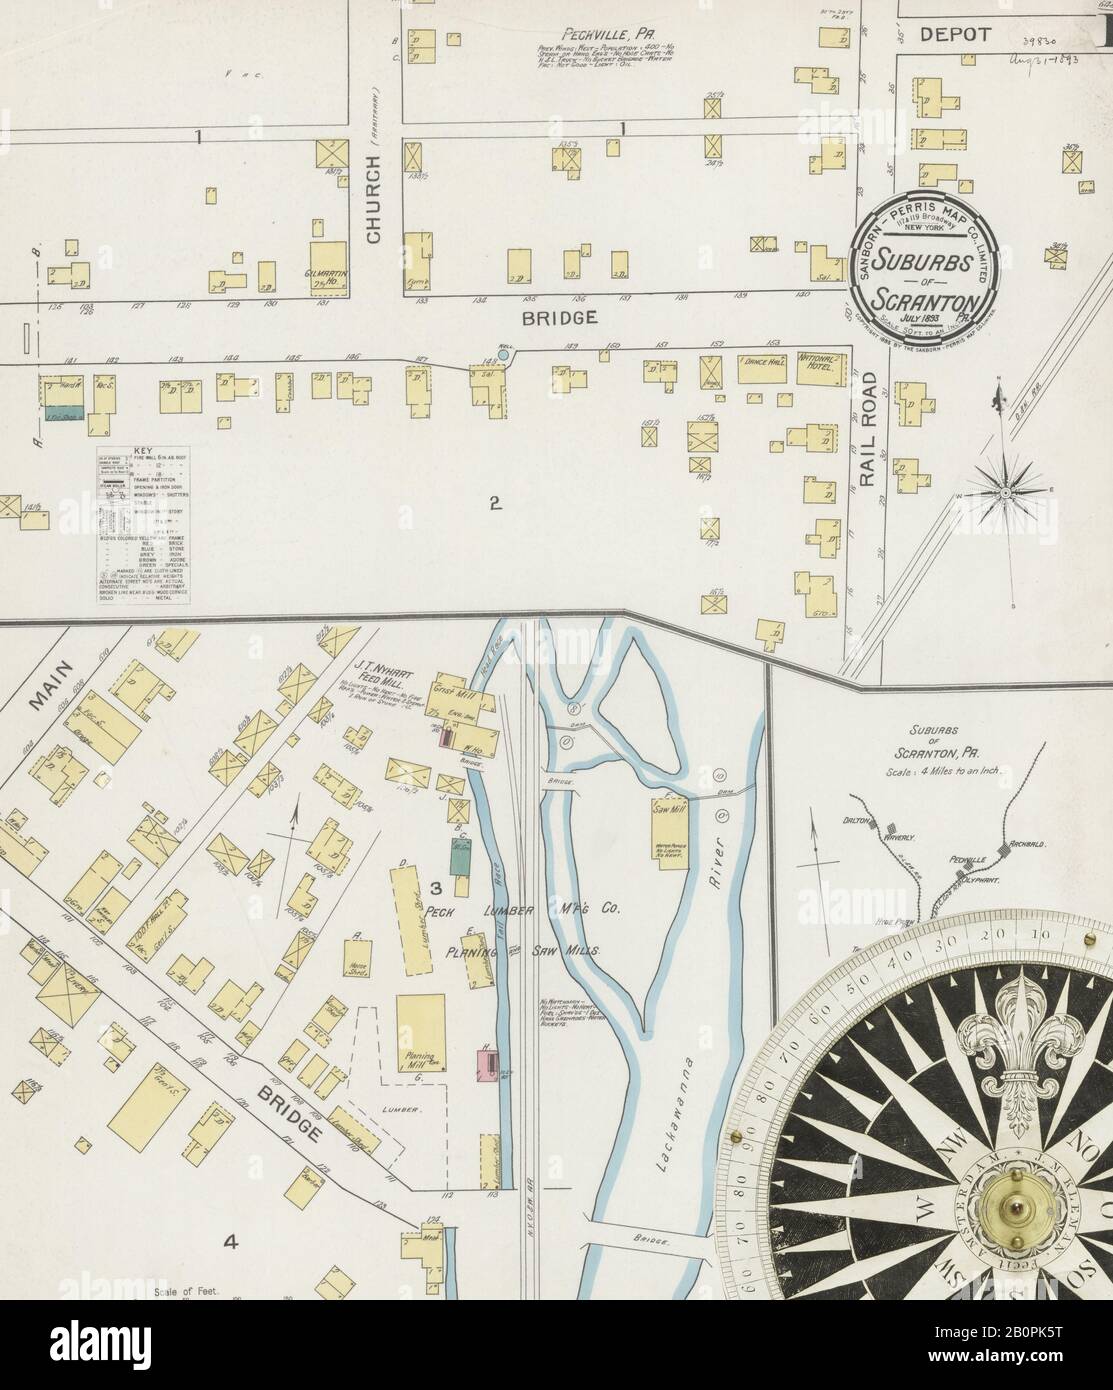 Image 1 of Sanborn Fire Insurance Map from Scranton Suburbs, Lackawanna County, Pennsylvania. Jul 1893. 5 Sheet(s). Includes Archbald, Dalton, Moosic, Moscow, Peckville, Taylorville, Waverly, America, street map with a Nineteenth Century compass Stock Photo